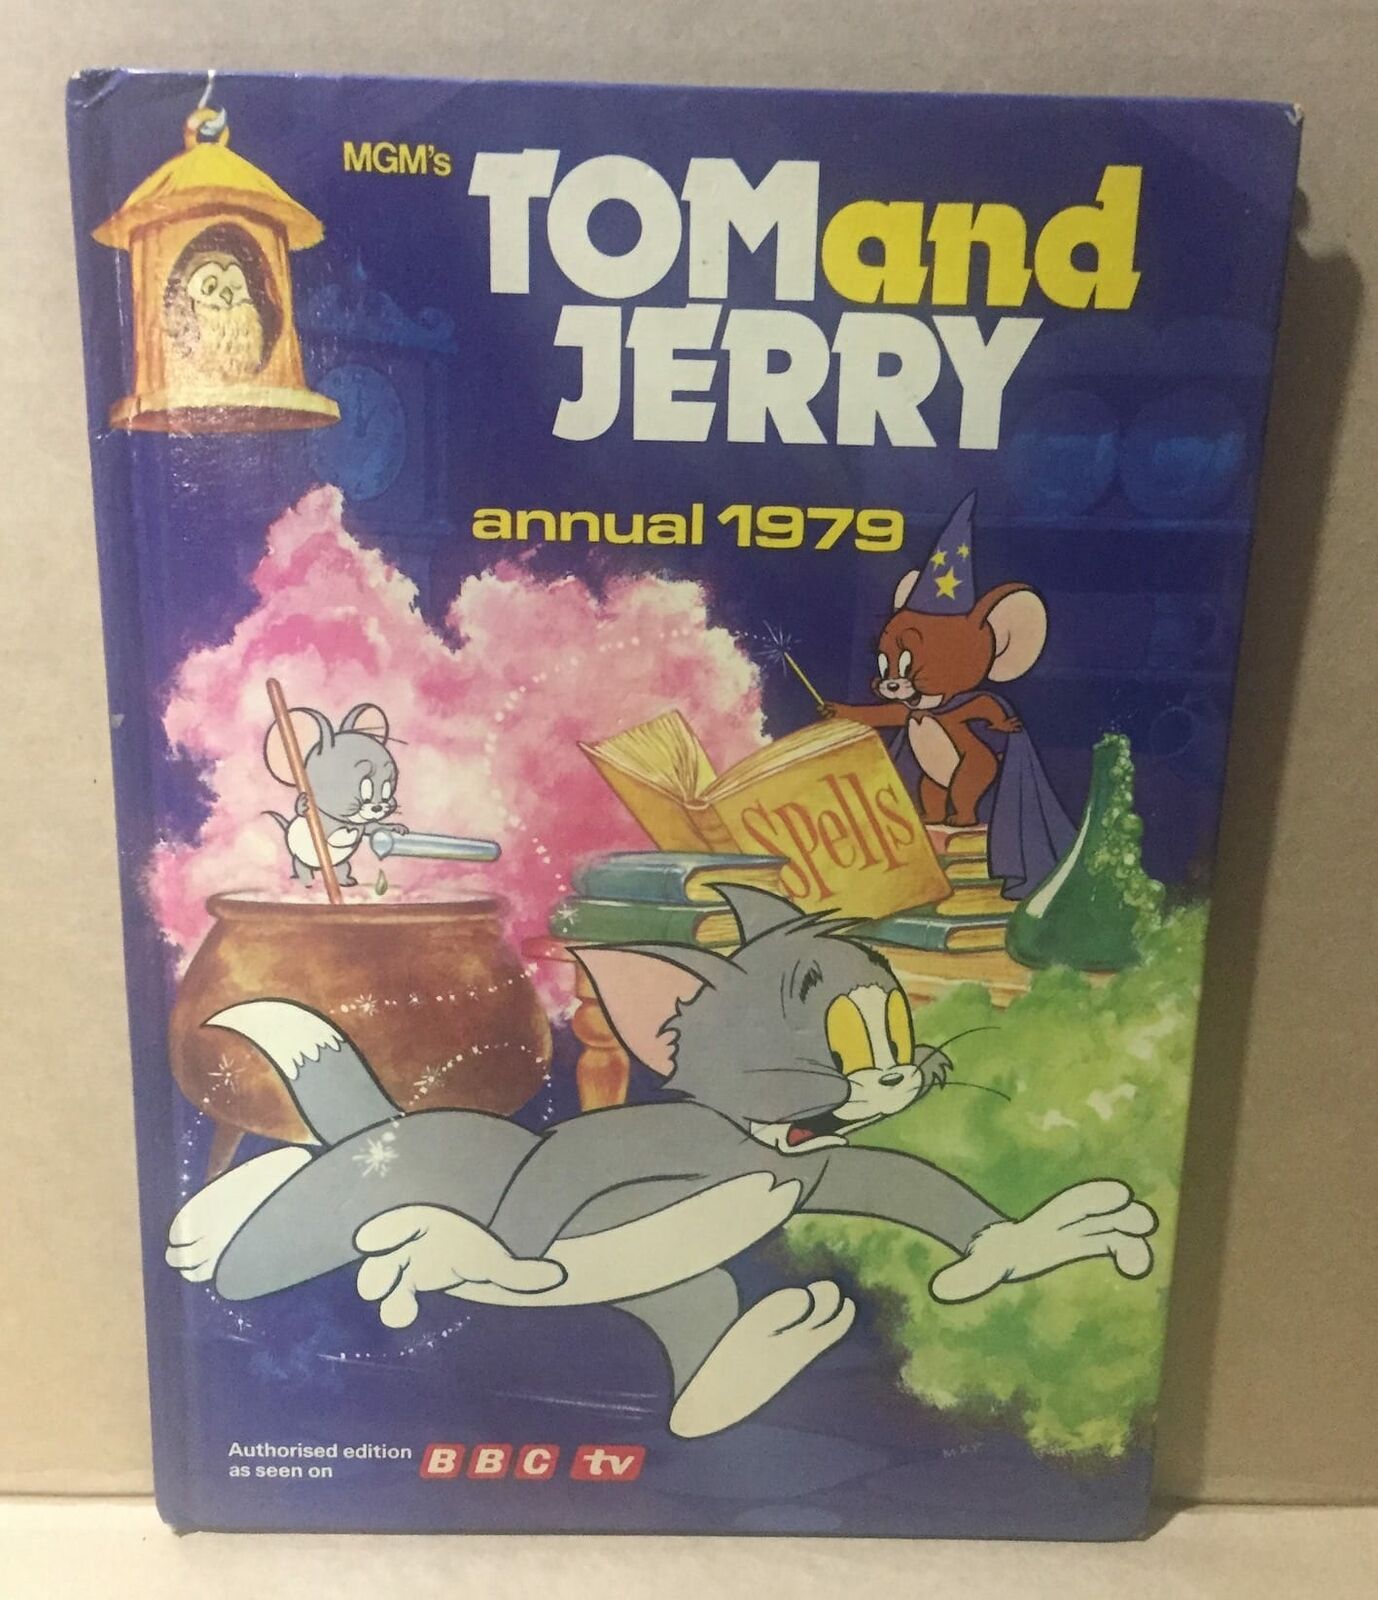 HARD COVER BOOK - MGM TOM AND JERRY ANNUAL 1979